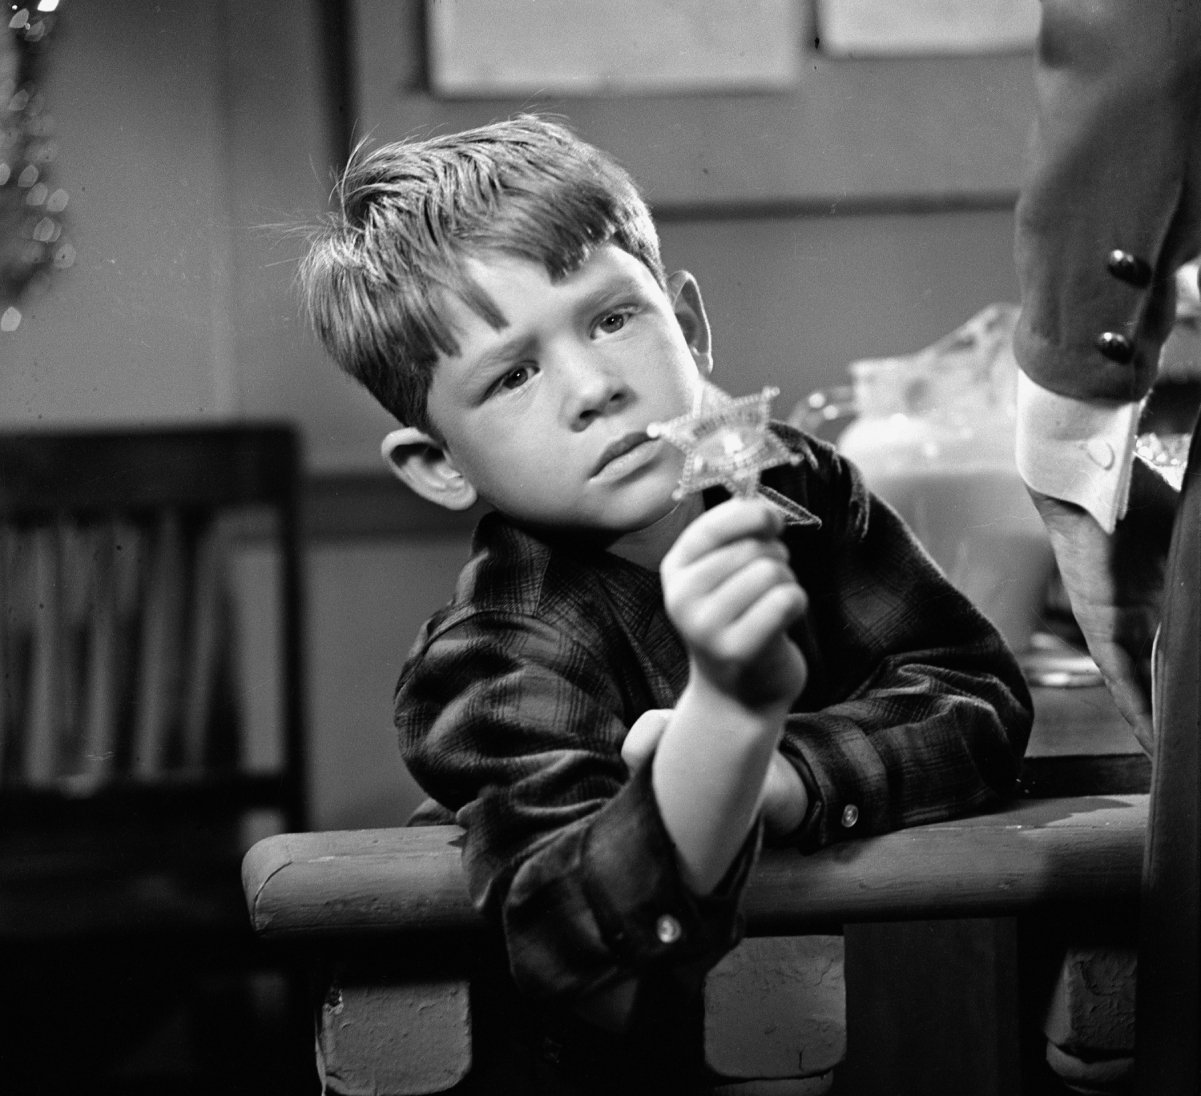 A young Ron Howard on the set of 'The Andy Griffith Show'